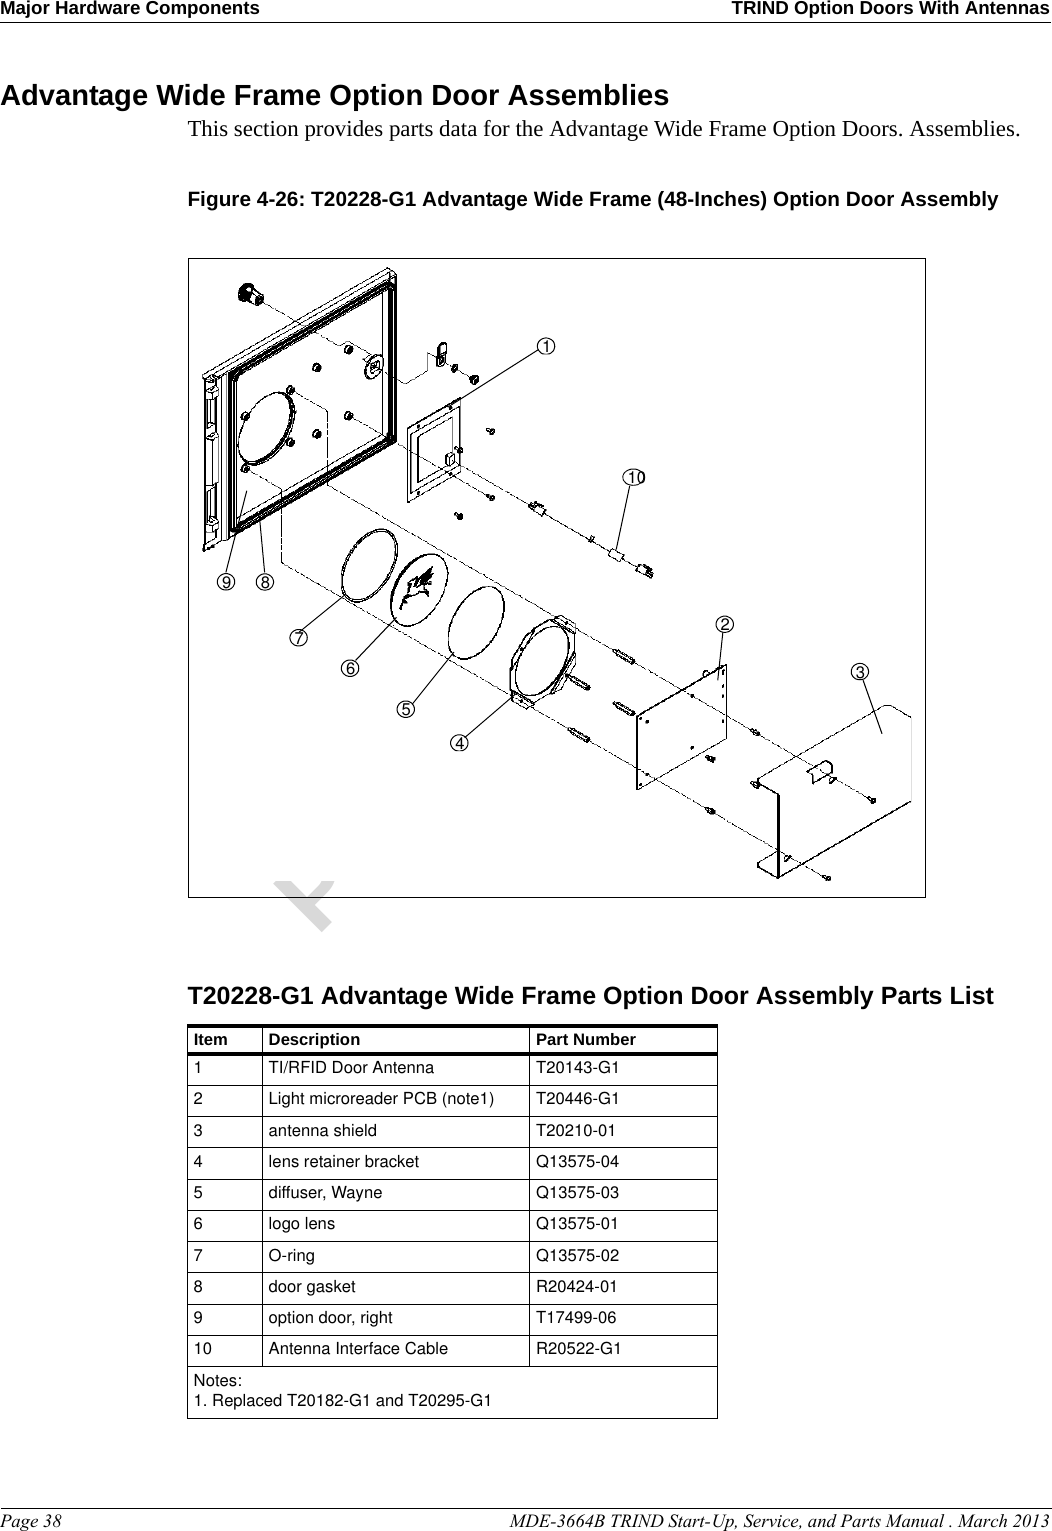 Major Hardware Components TRIND Option Doors With AntennasPage 38                                                                                                  MDE-3664B TRIND Start-Up, Service, and Parts Manual . March 2013PreliminaryAdvantage Wide Frame Option Door AssembliesThis section provides parts data for the Advantage Wide Frame Option Doors. Assemblies.Figure 4-26: T20228-G1 Advantage Wide Frame (48-Inches) Option Door Assembly19876542310T20228-G1 Advantage Wide Frame Option Door Assembly Parts ListItem Description Part Number1TI/RFID Door Antenna T20143-G12Light microreader PCB (note1) T20446-G13antenna shield T20210-014lens retainer bracket Q13575-045diffuser, Wayne Q13575-036logo lens Q13575-017O-ring Q13575-028door gasket R20424-019option door, right T17499-0610 Antenna Interface Cable R20522-G1Notes:1. Replaced T20182-G1 and T20295-G1